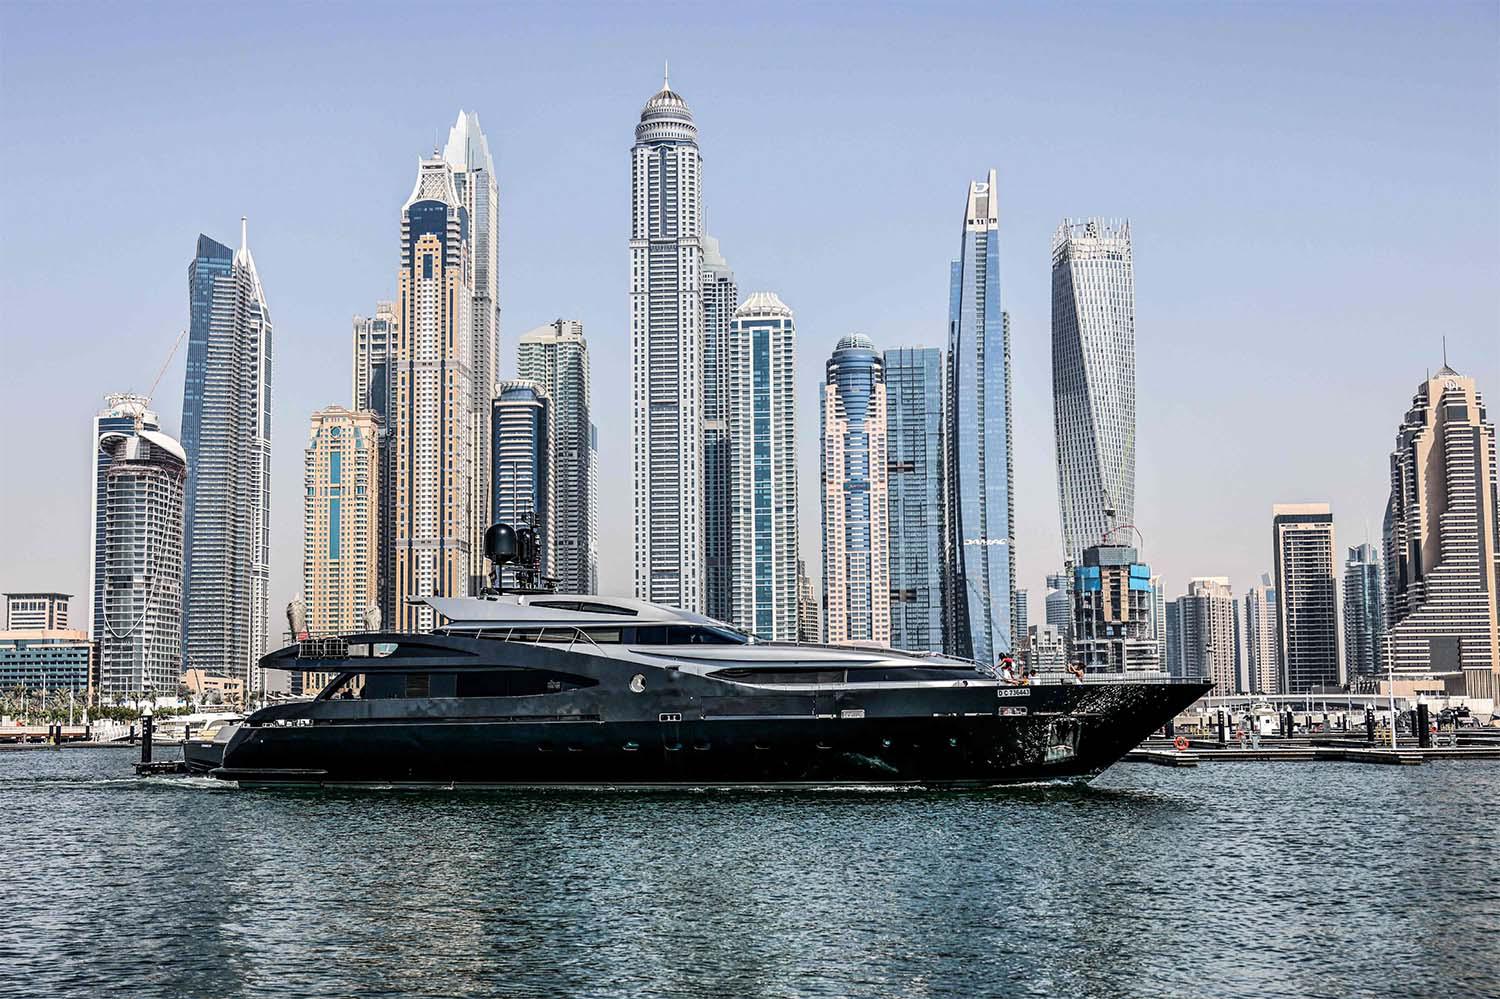 Luxury yachts offer the perfect escape from crowded places where the risk of catching COVID-19 is higher